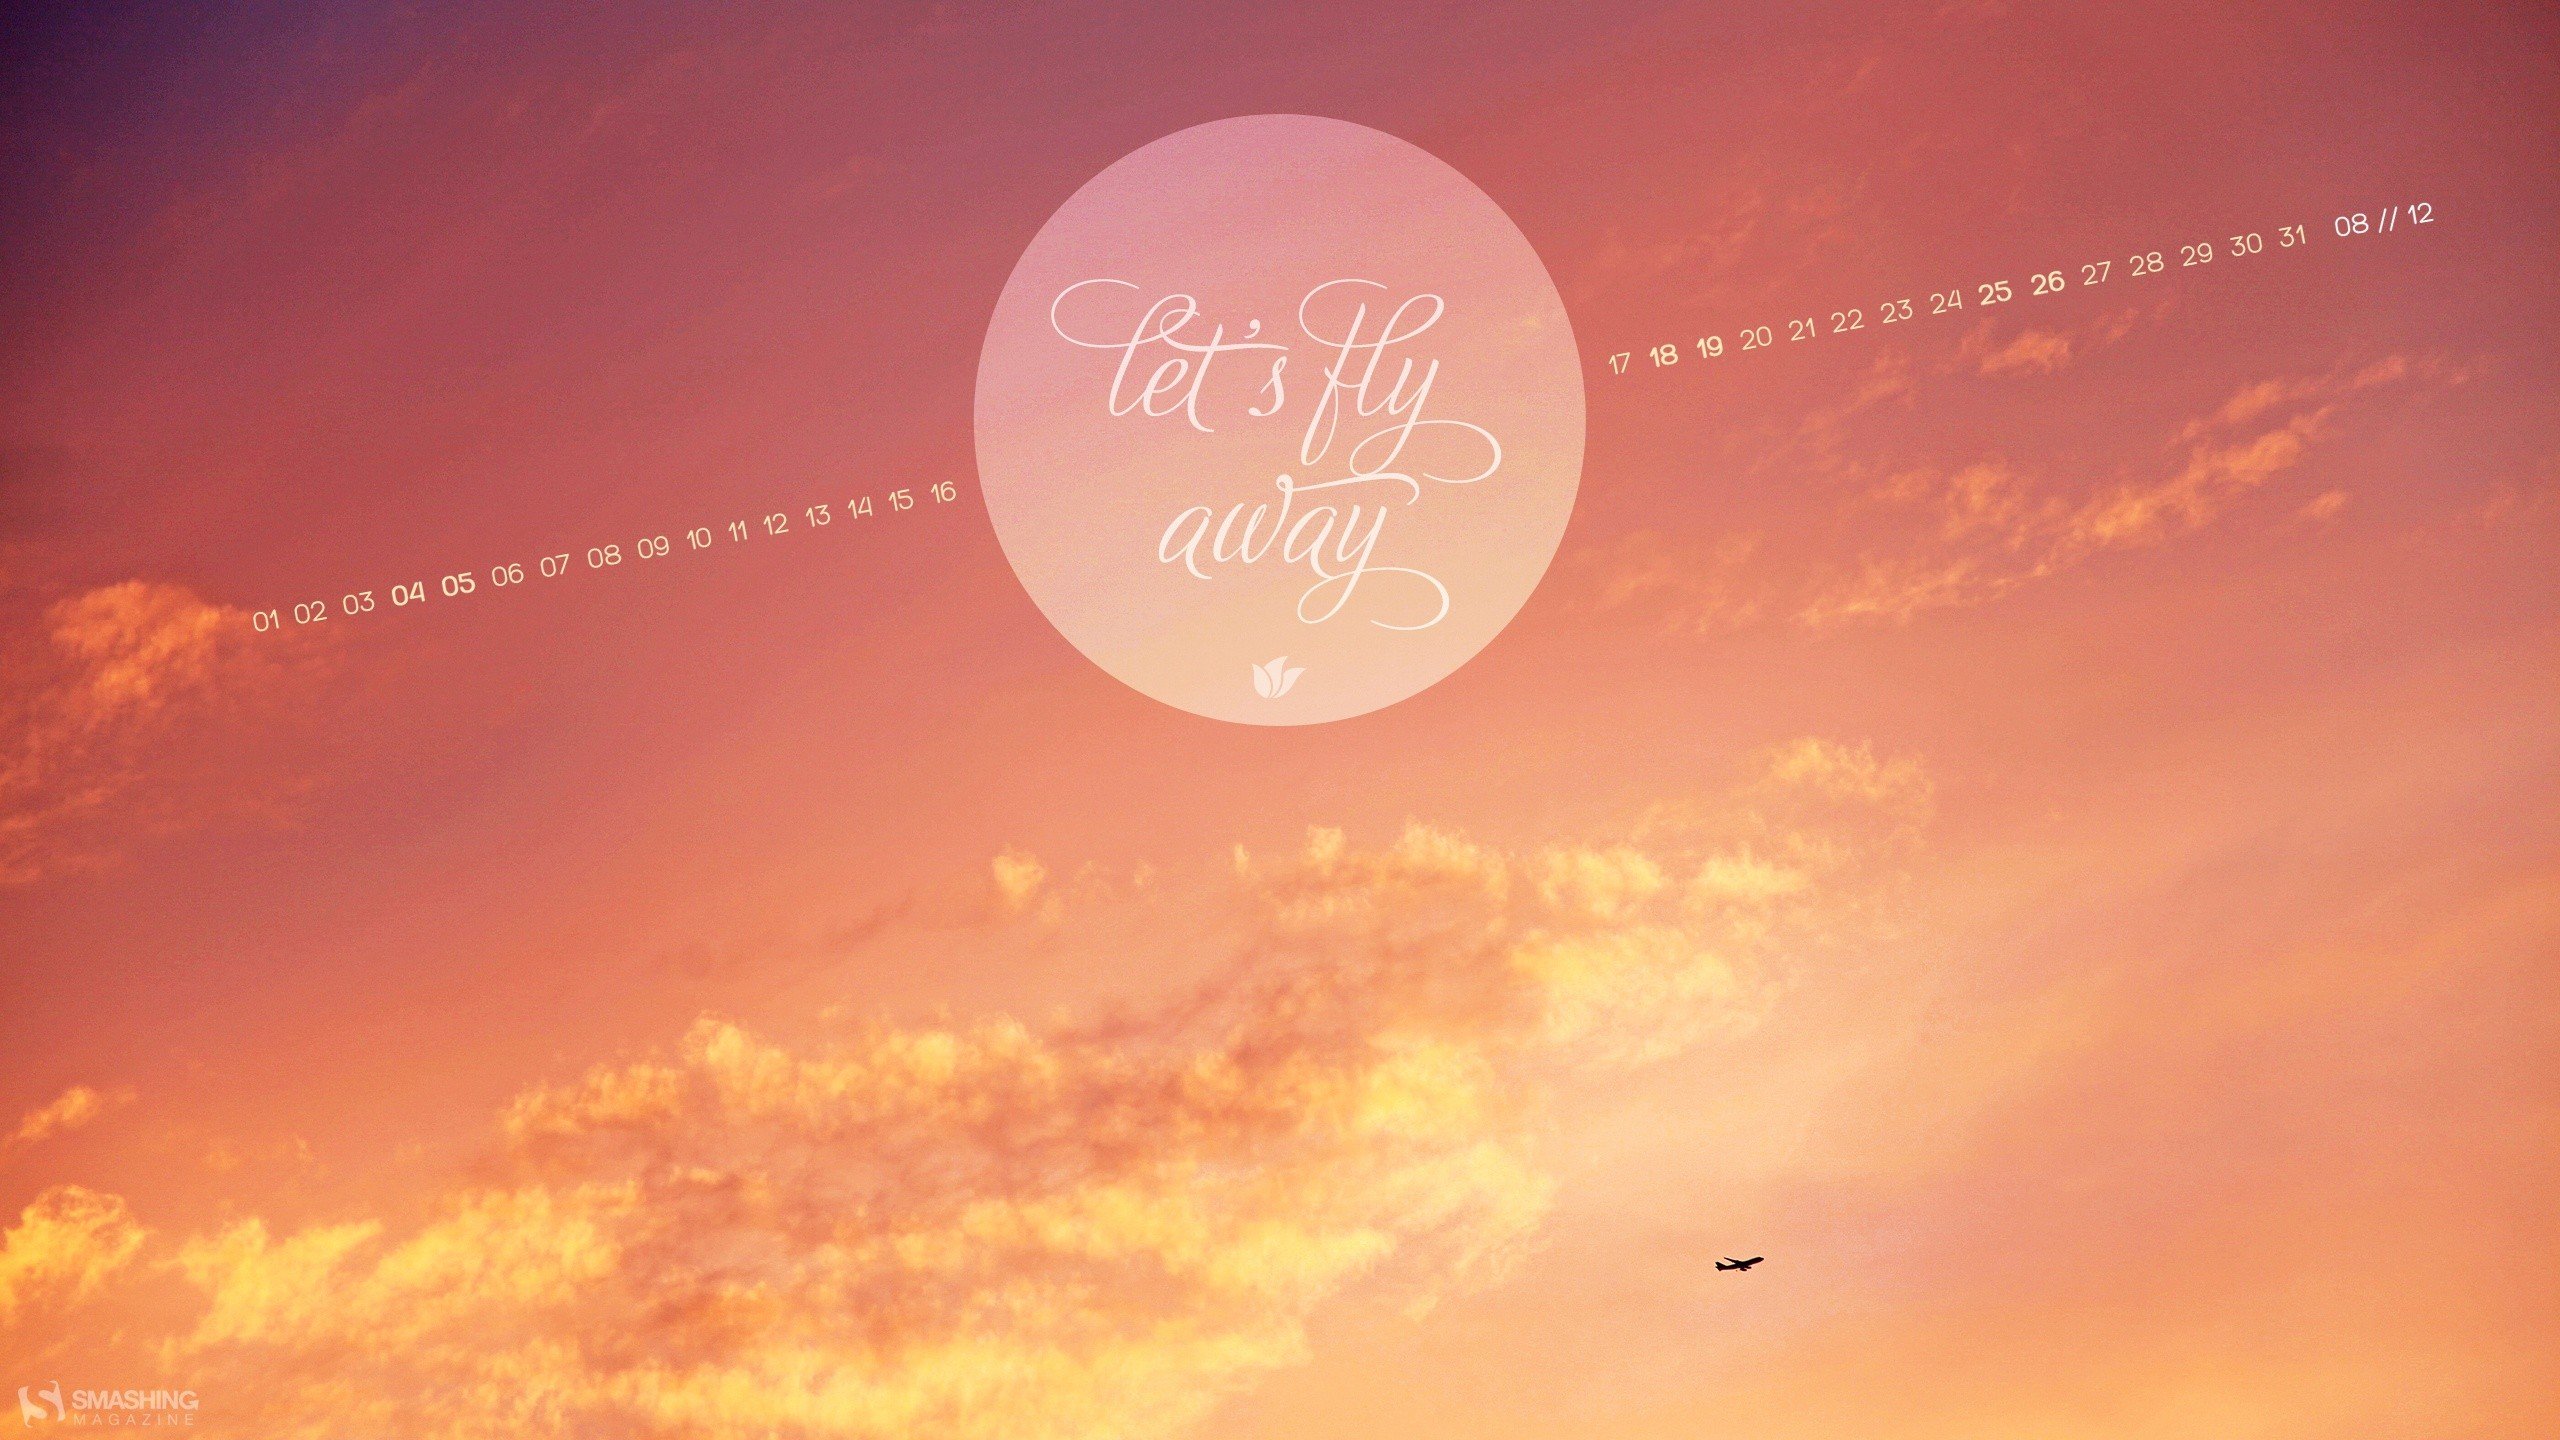 aircraft, Typography, August, Escape, Calendar, Skyscapes, Smashing, Magazine Wallpaper